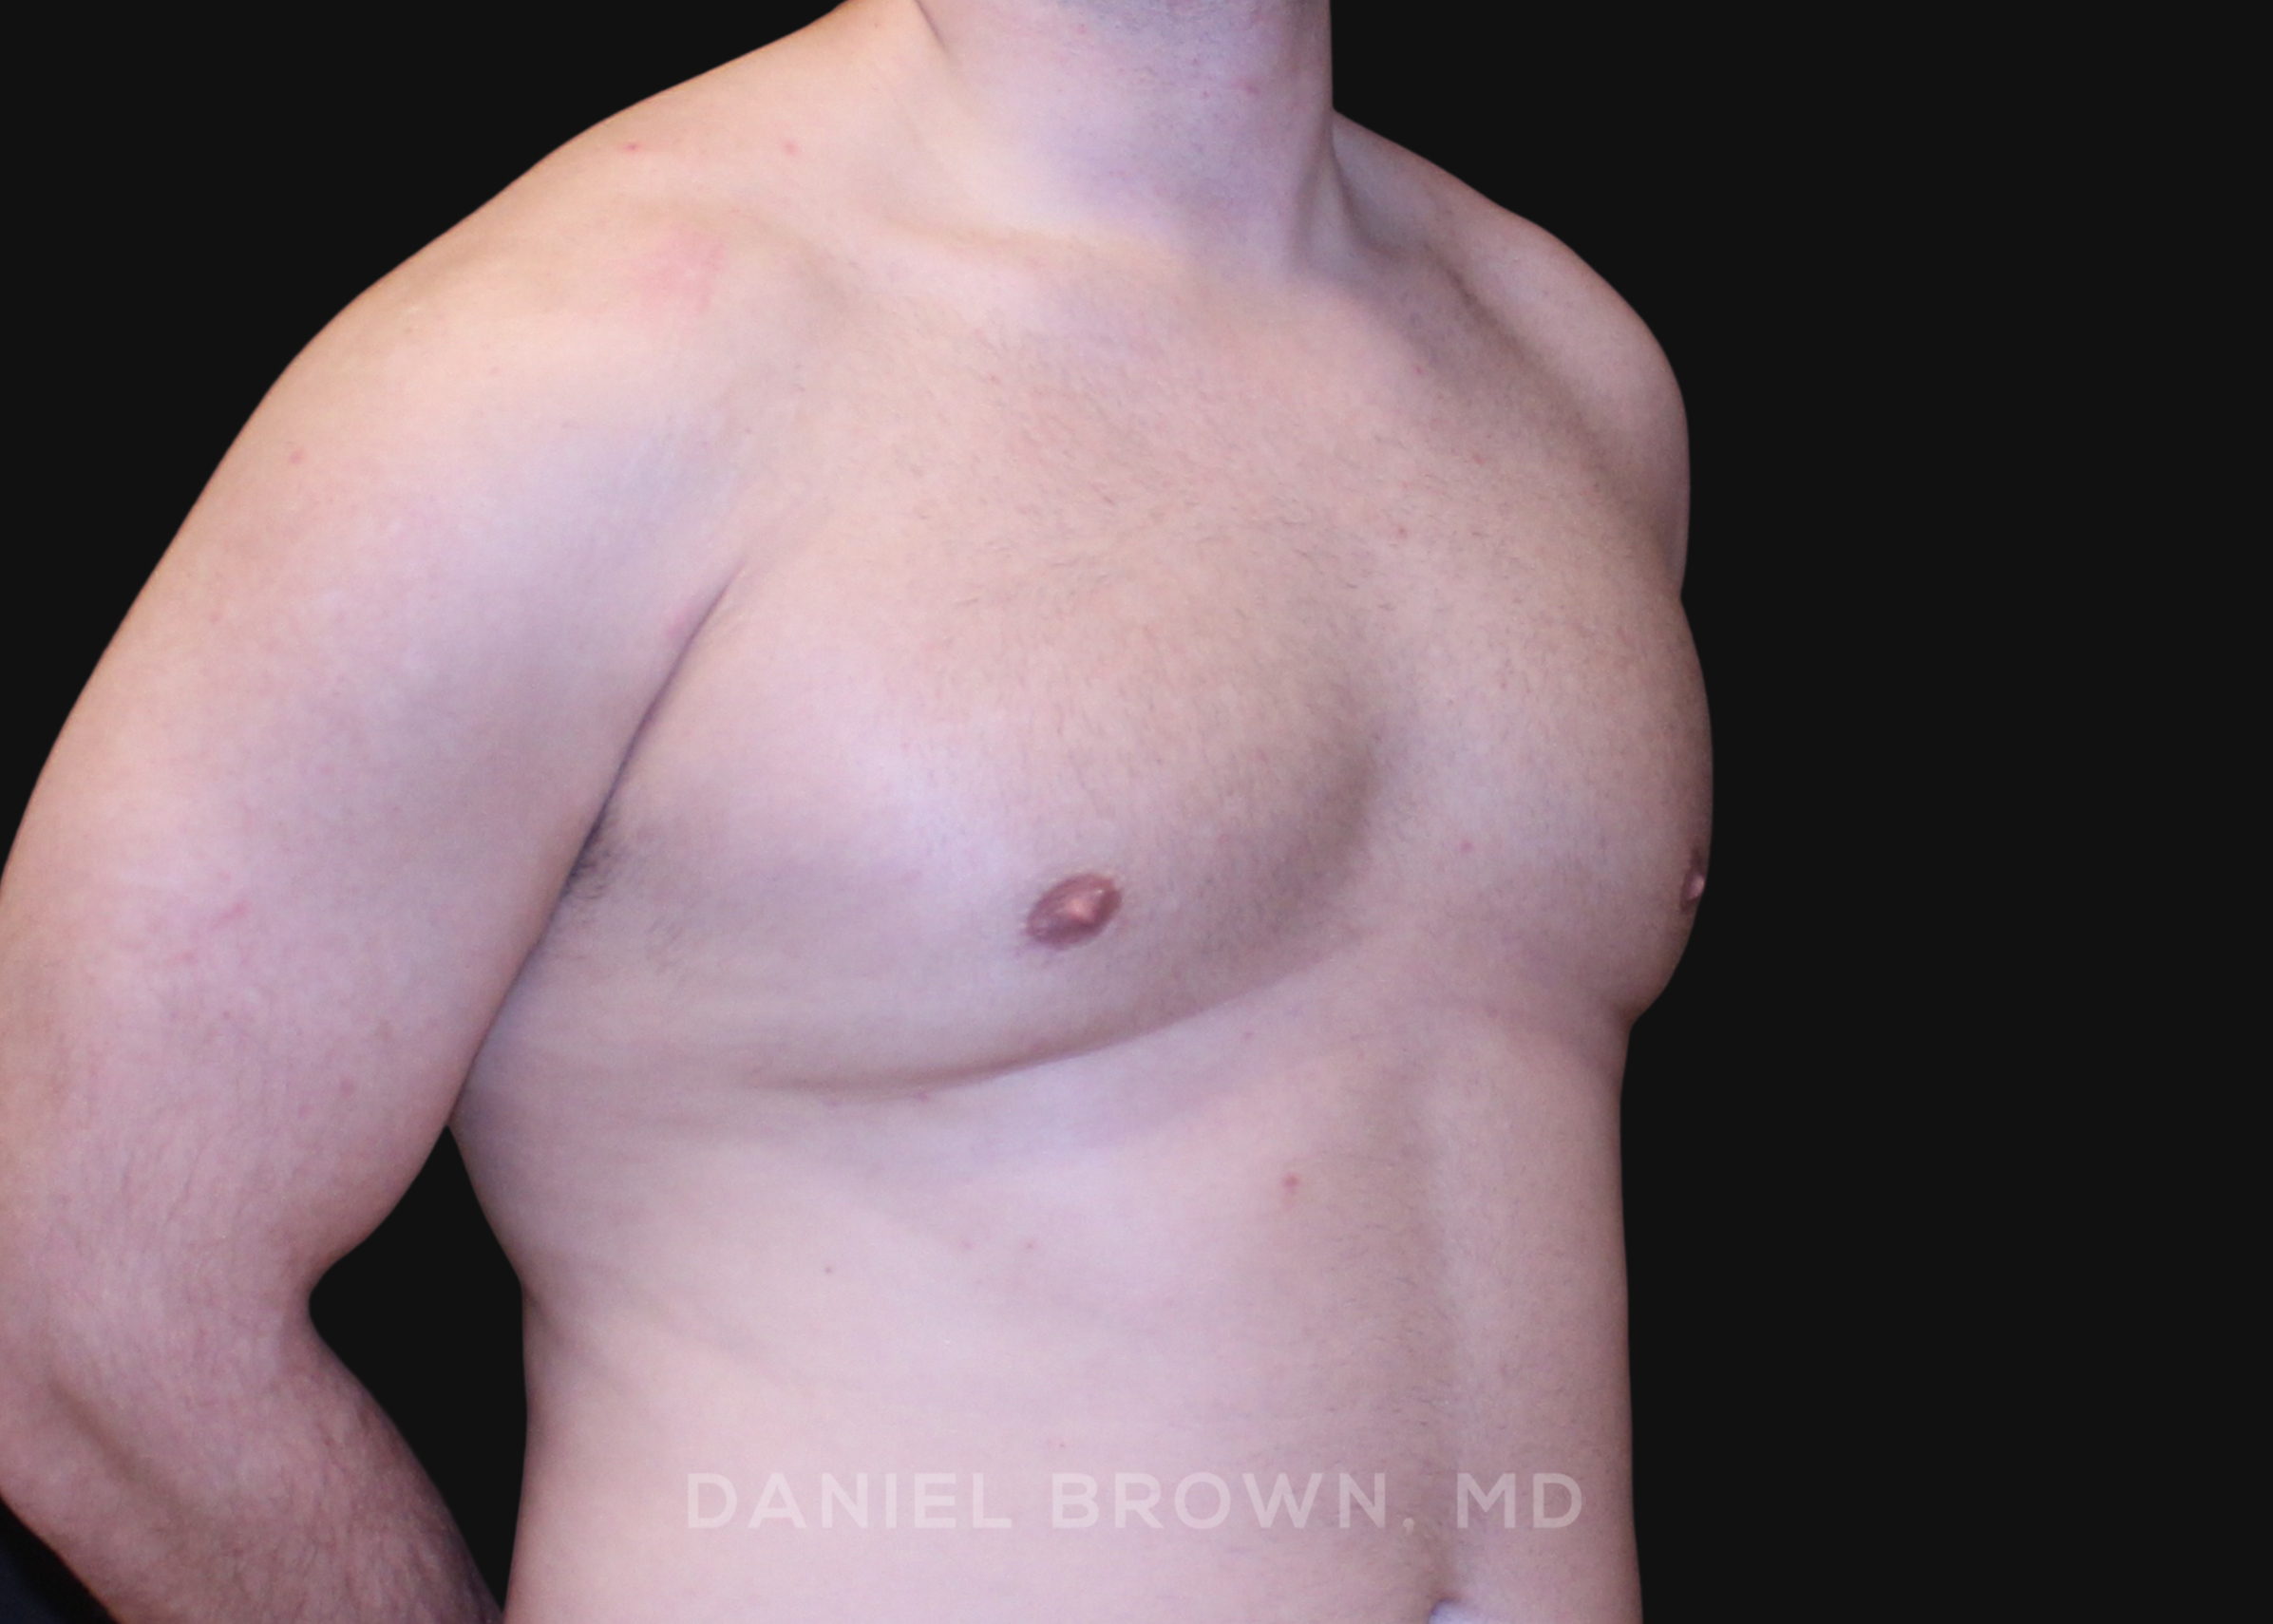 Male Breast Reduction Patient Photo - Case 2724 - after view